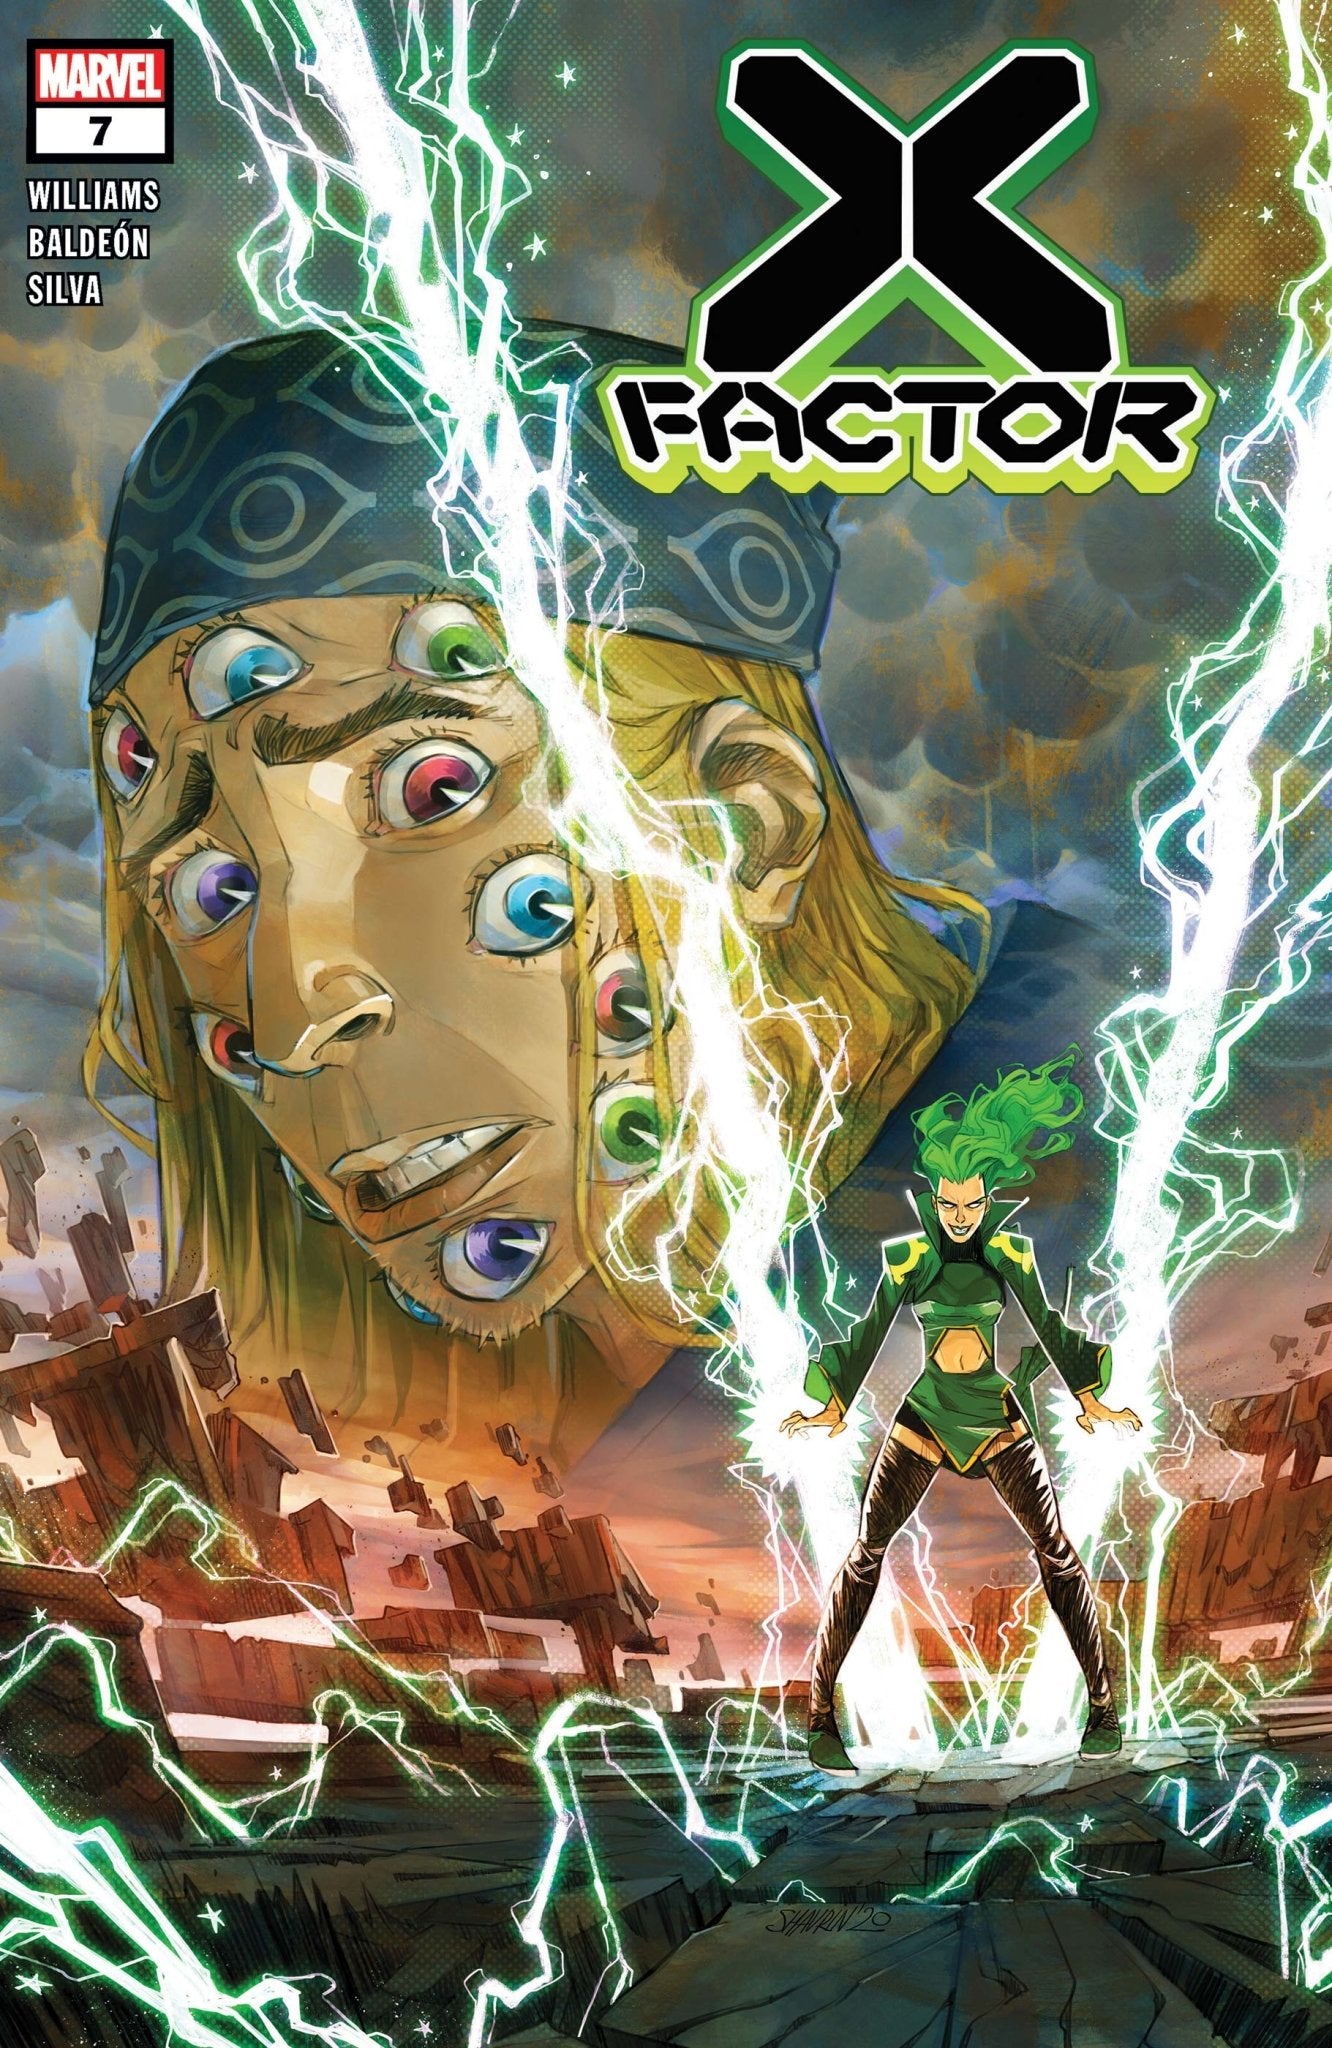 X-FACTOR #7 - The Comic Construct